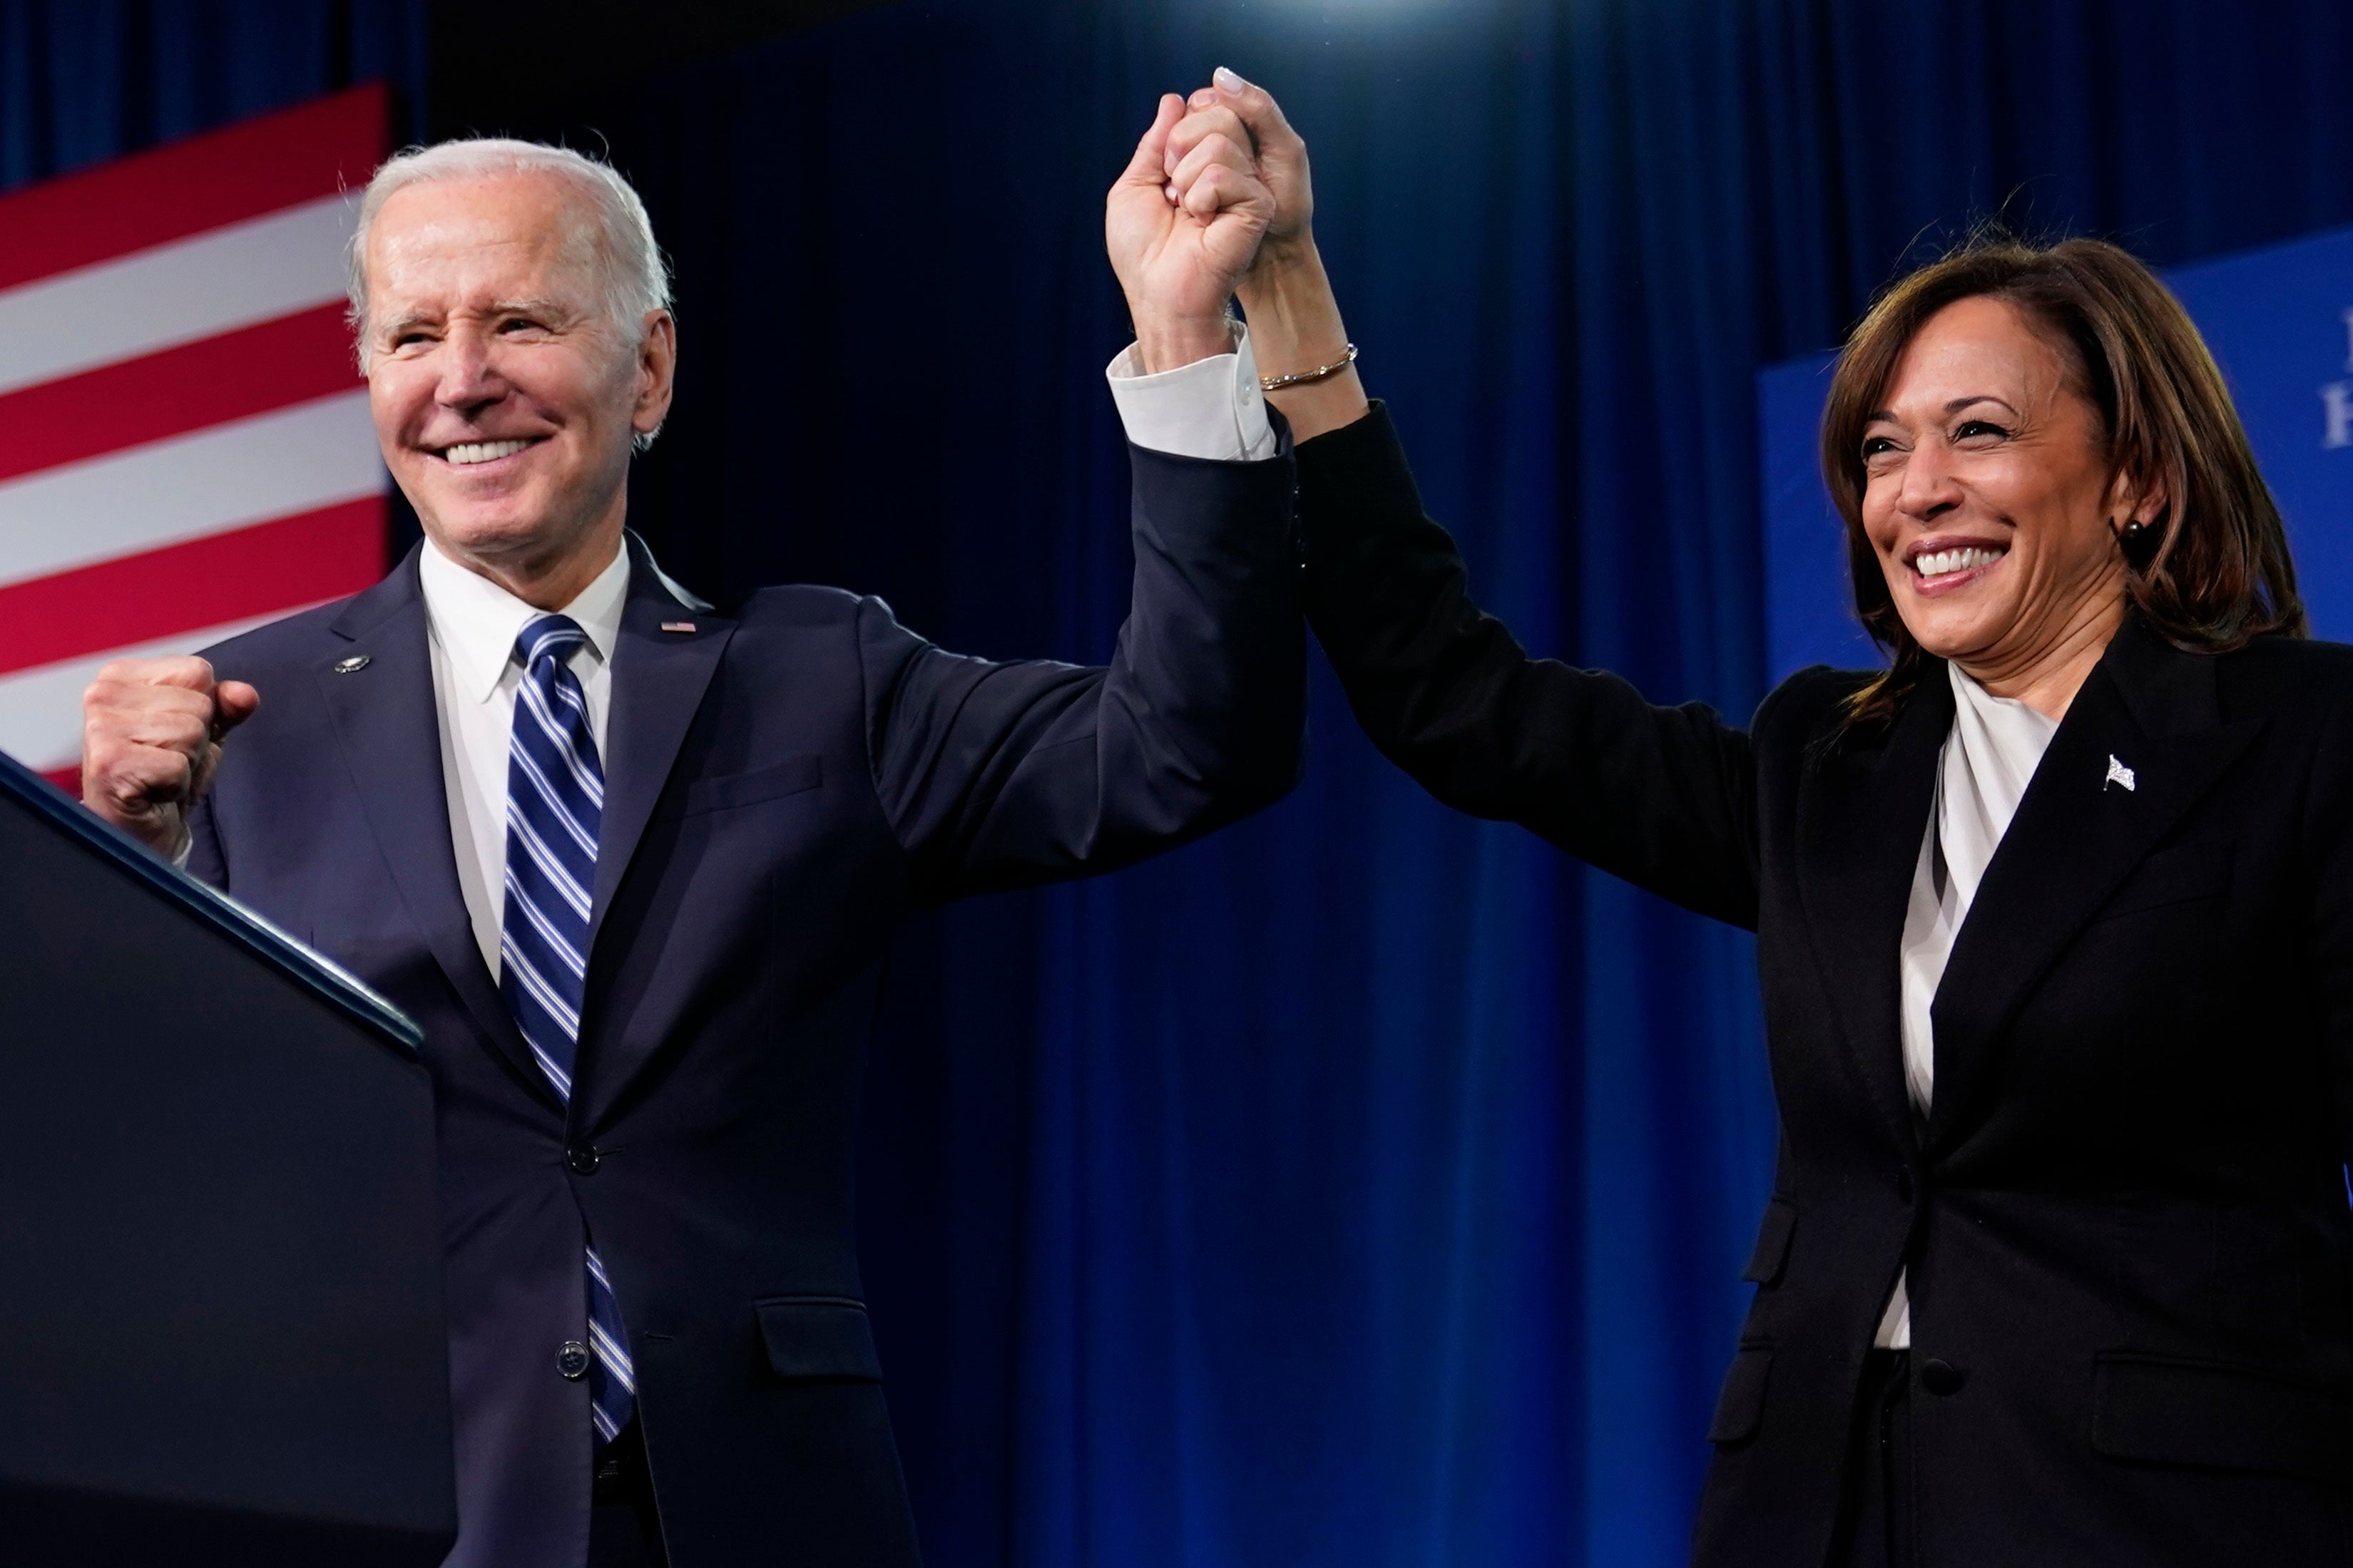 Harris would come top of a hypothetical post-Biden ticket with substantial support from key Democrats